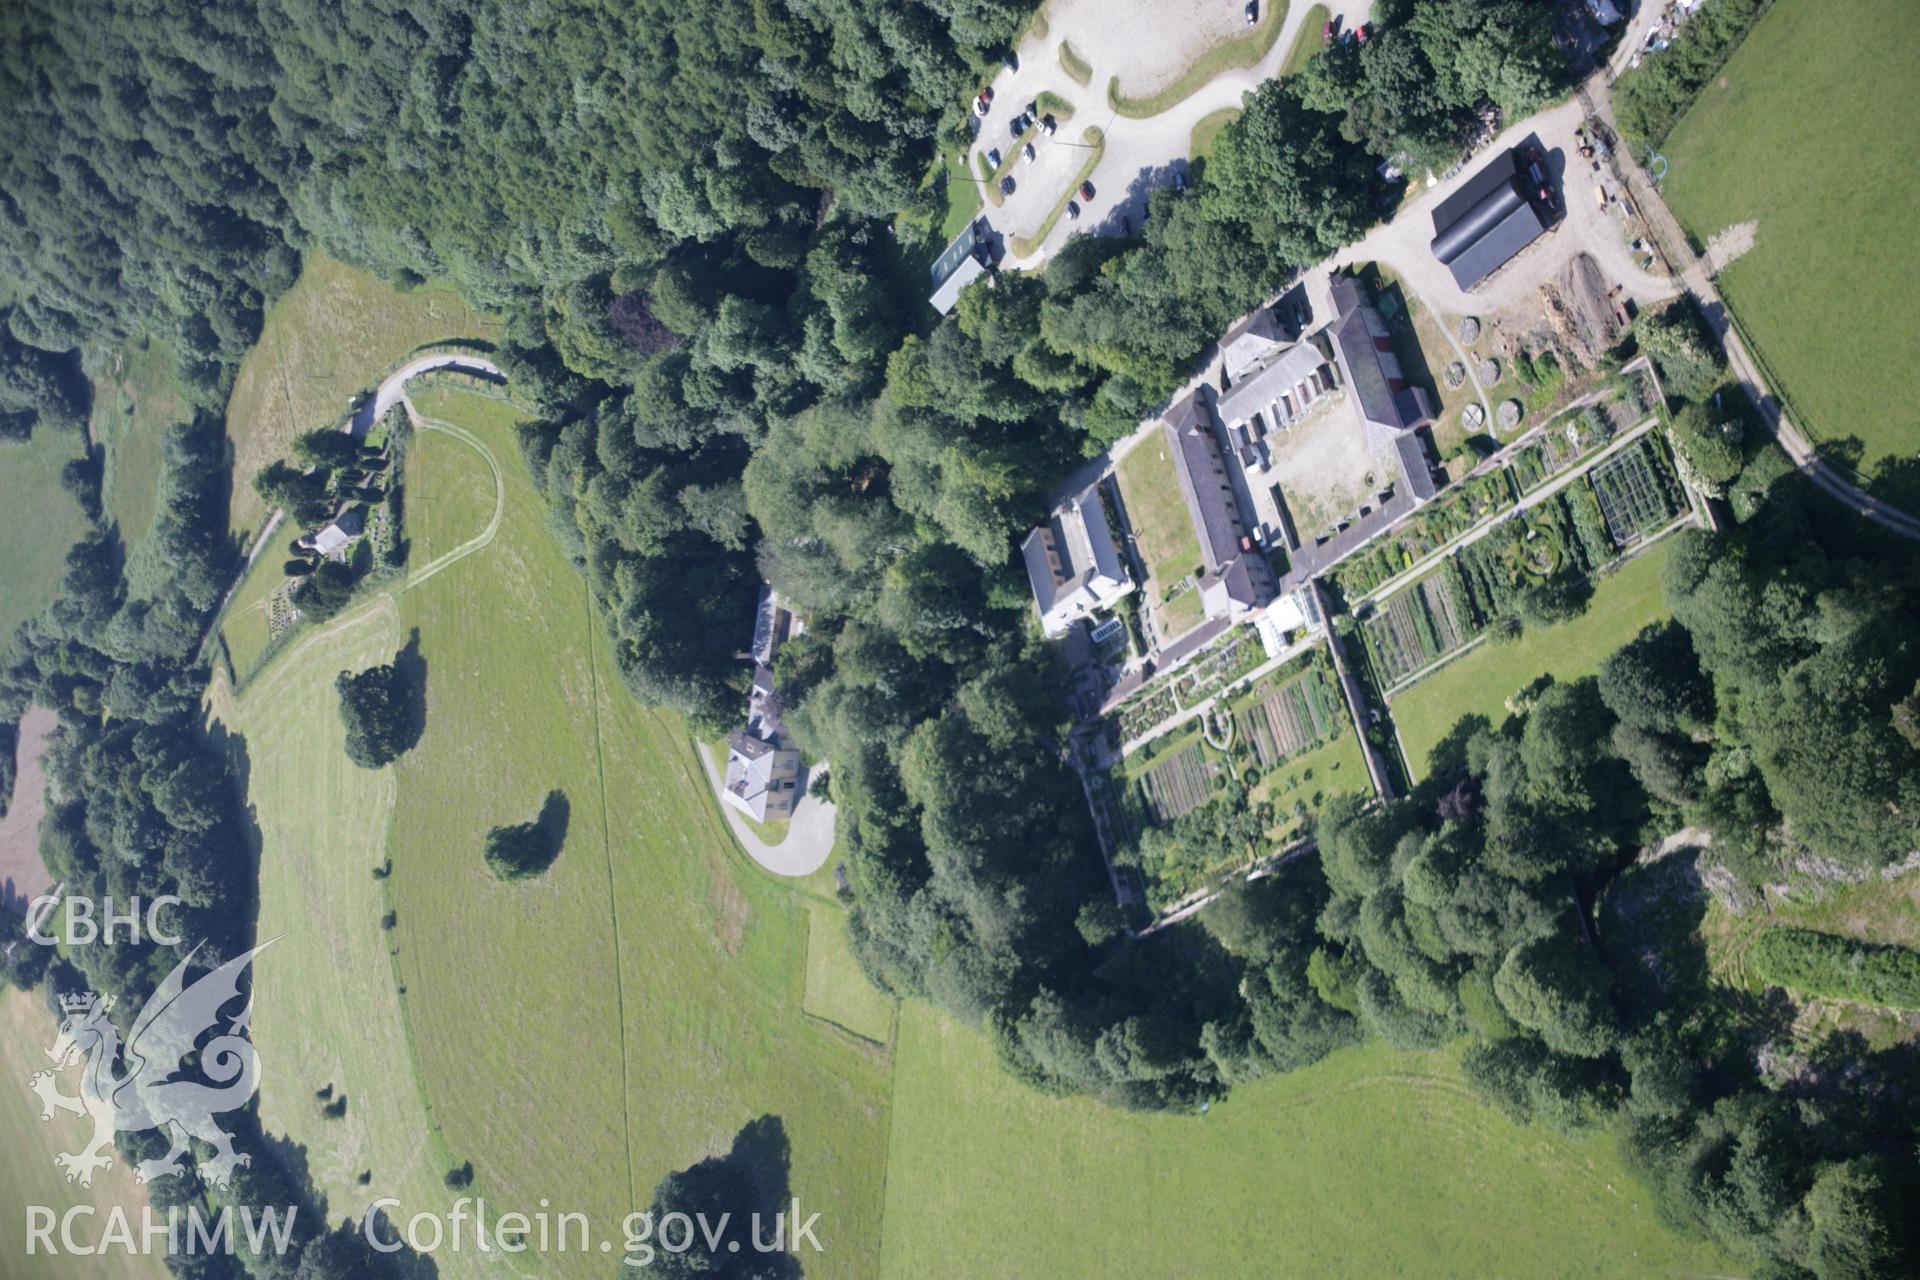 RCAHMW colour oblique aerial photograph of Llanerchaeron House and walled gardens, viewed from the east. Taken on 23 June 2005 by Toby Driver